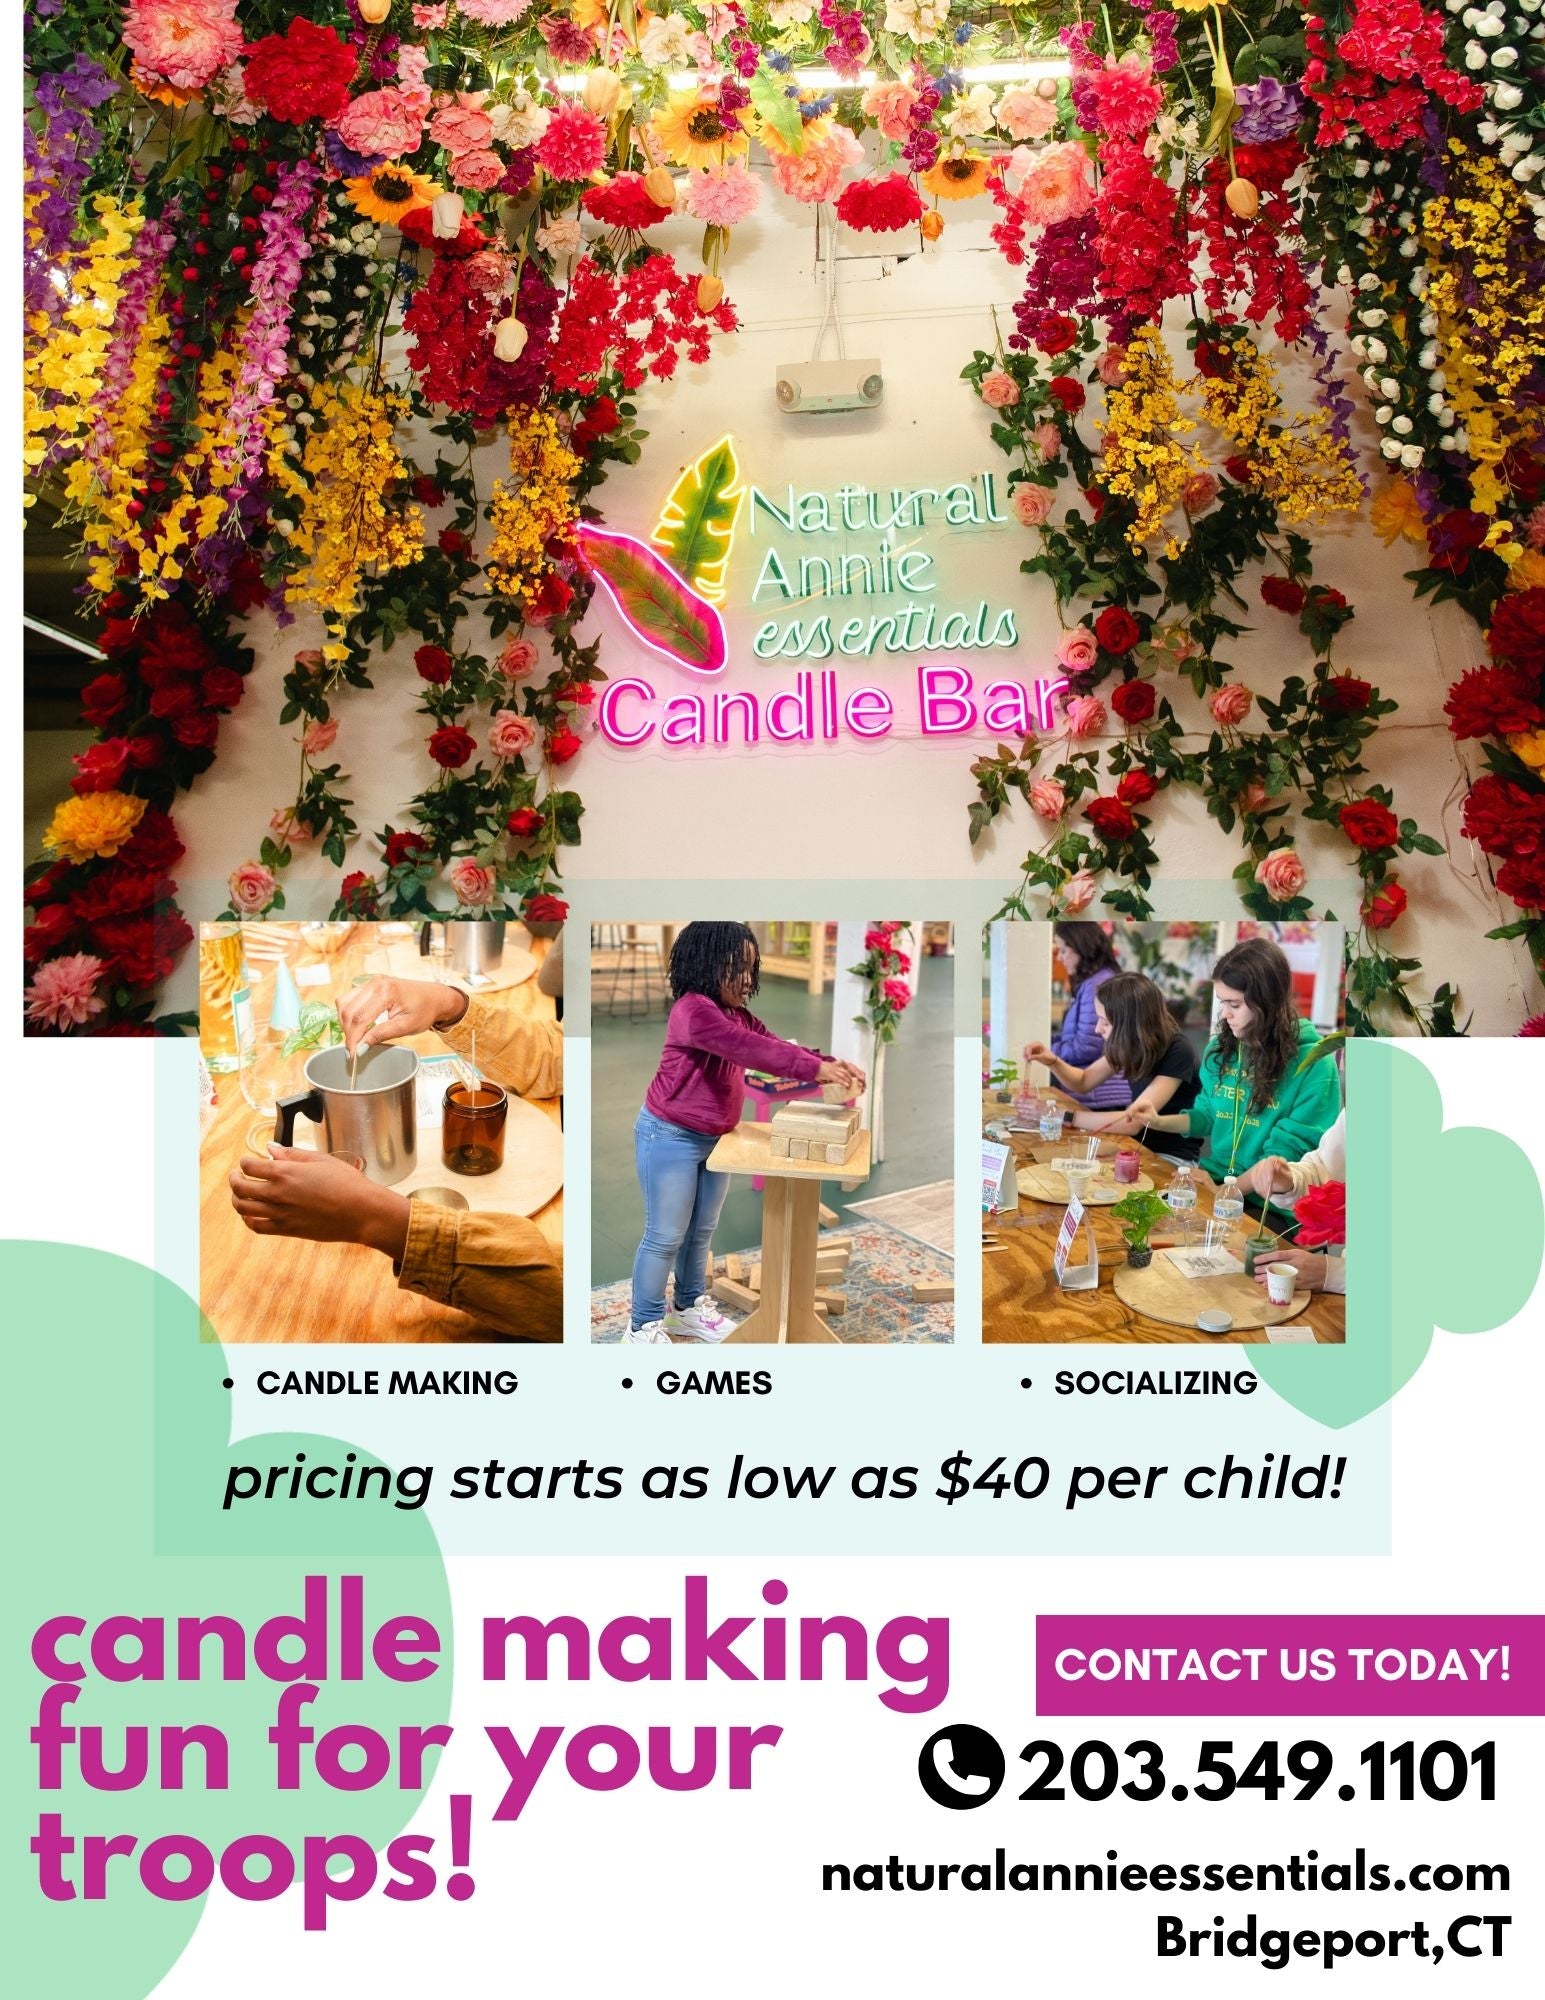 naturalannie essentials girl scout candle making experience